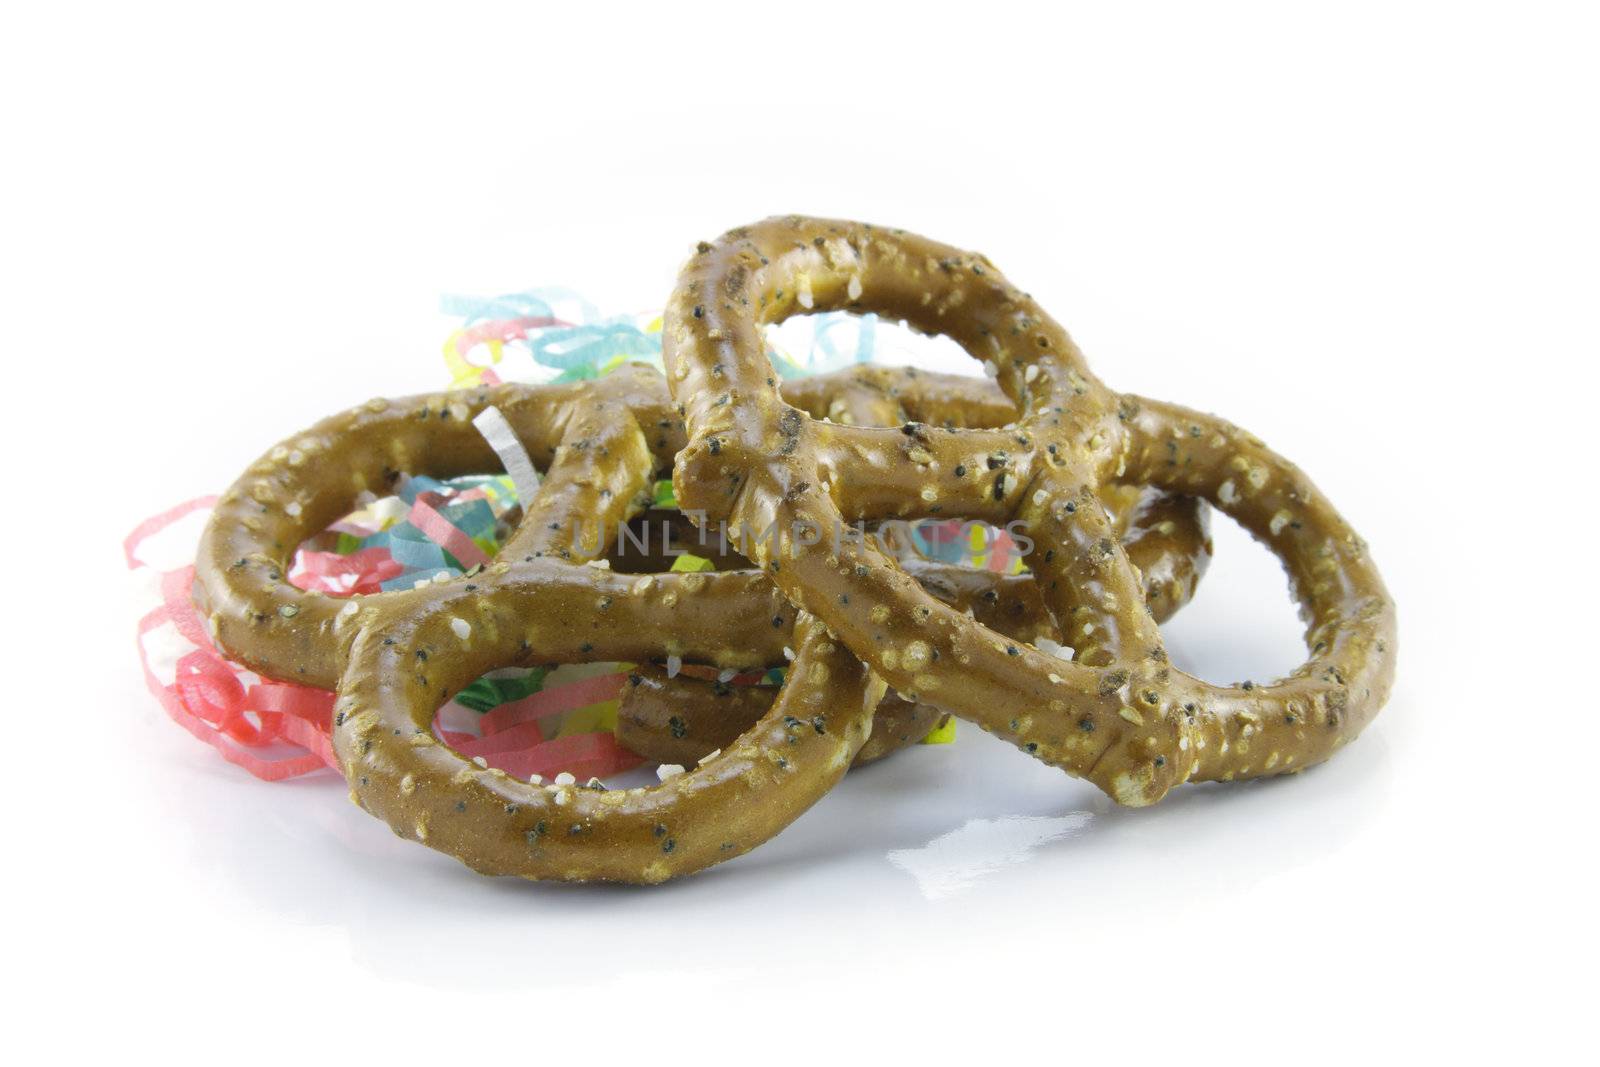 Two salty baked pretzels with party streamers on a reflective white background